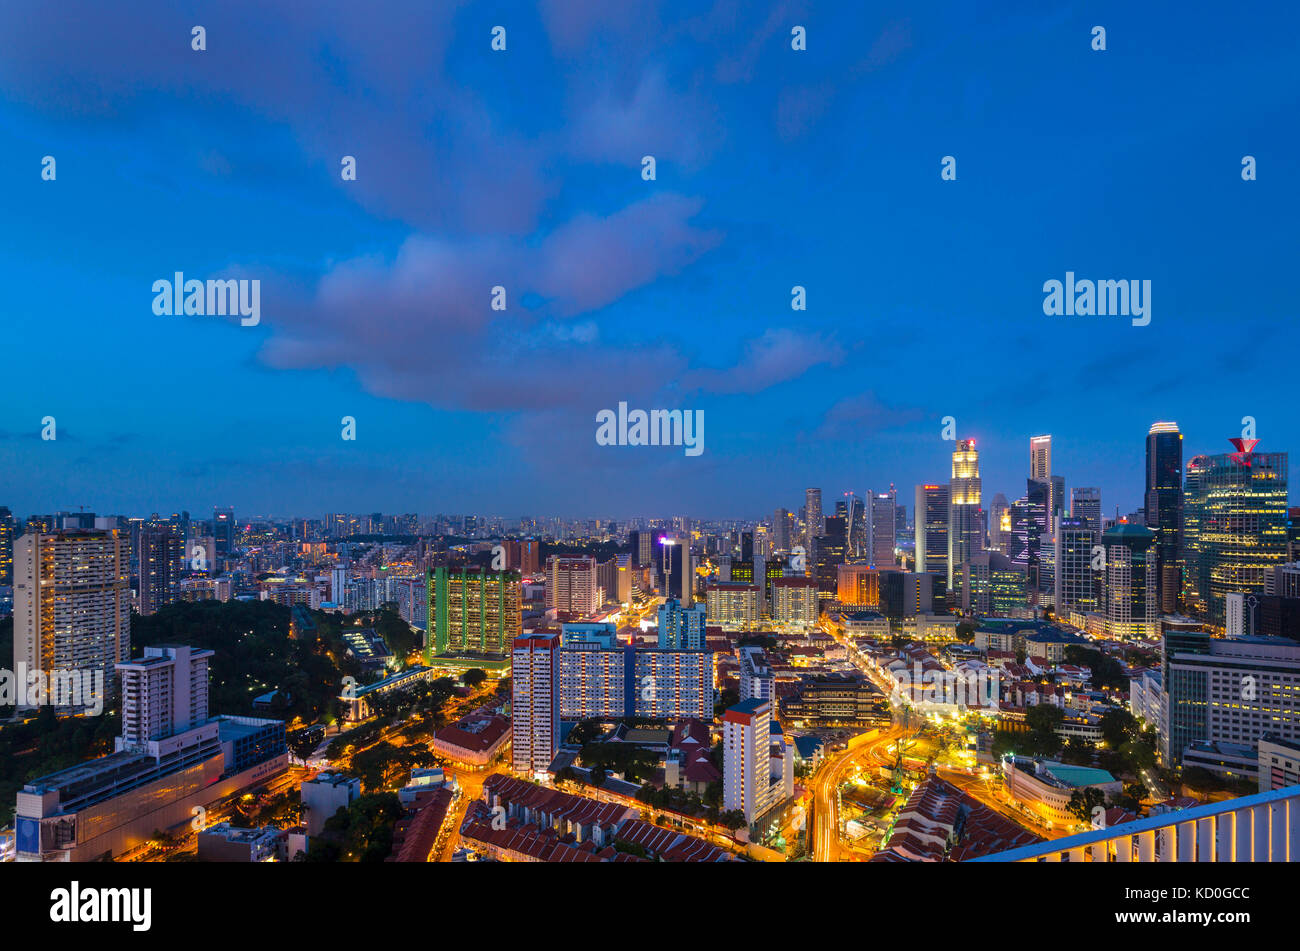 Financial district cityscape and chinatown at night, Singapore, South East Asia Stock Photo